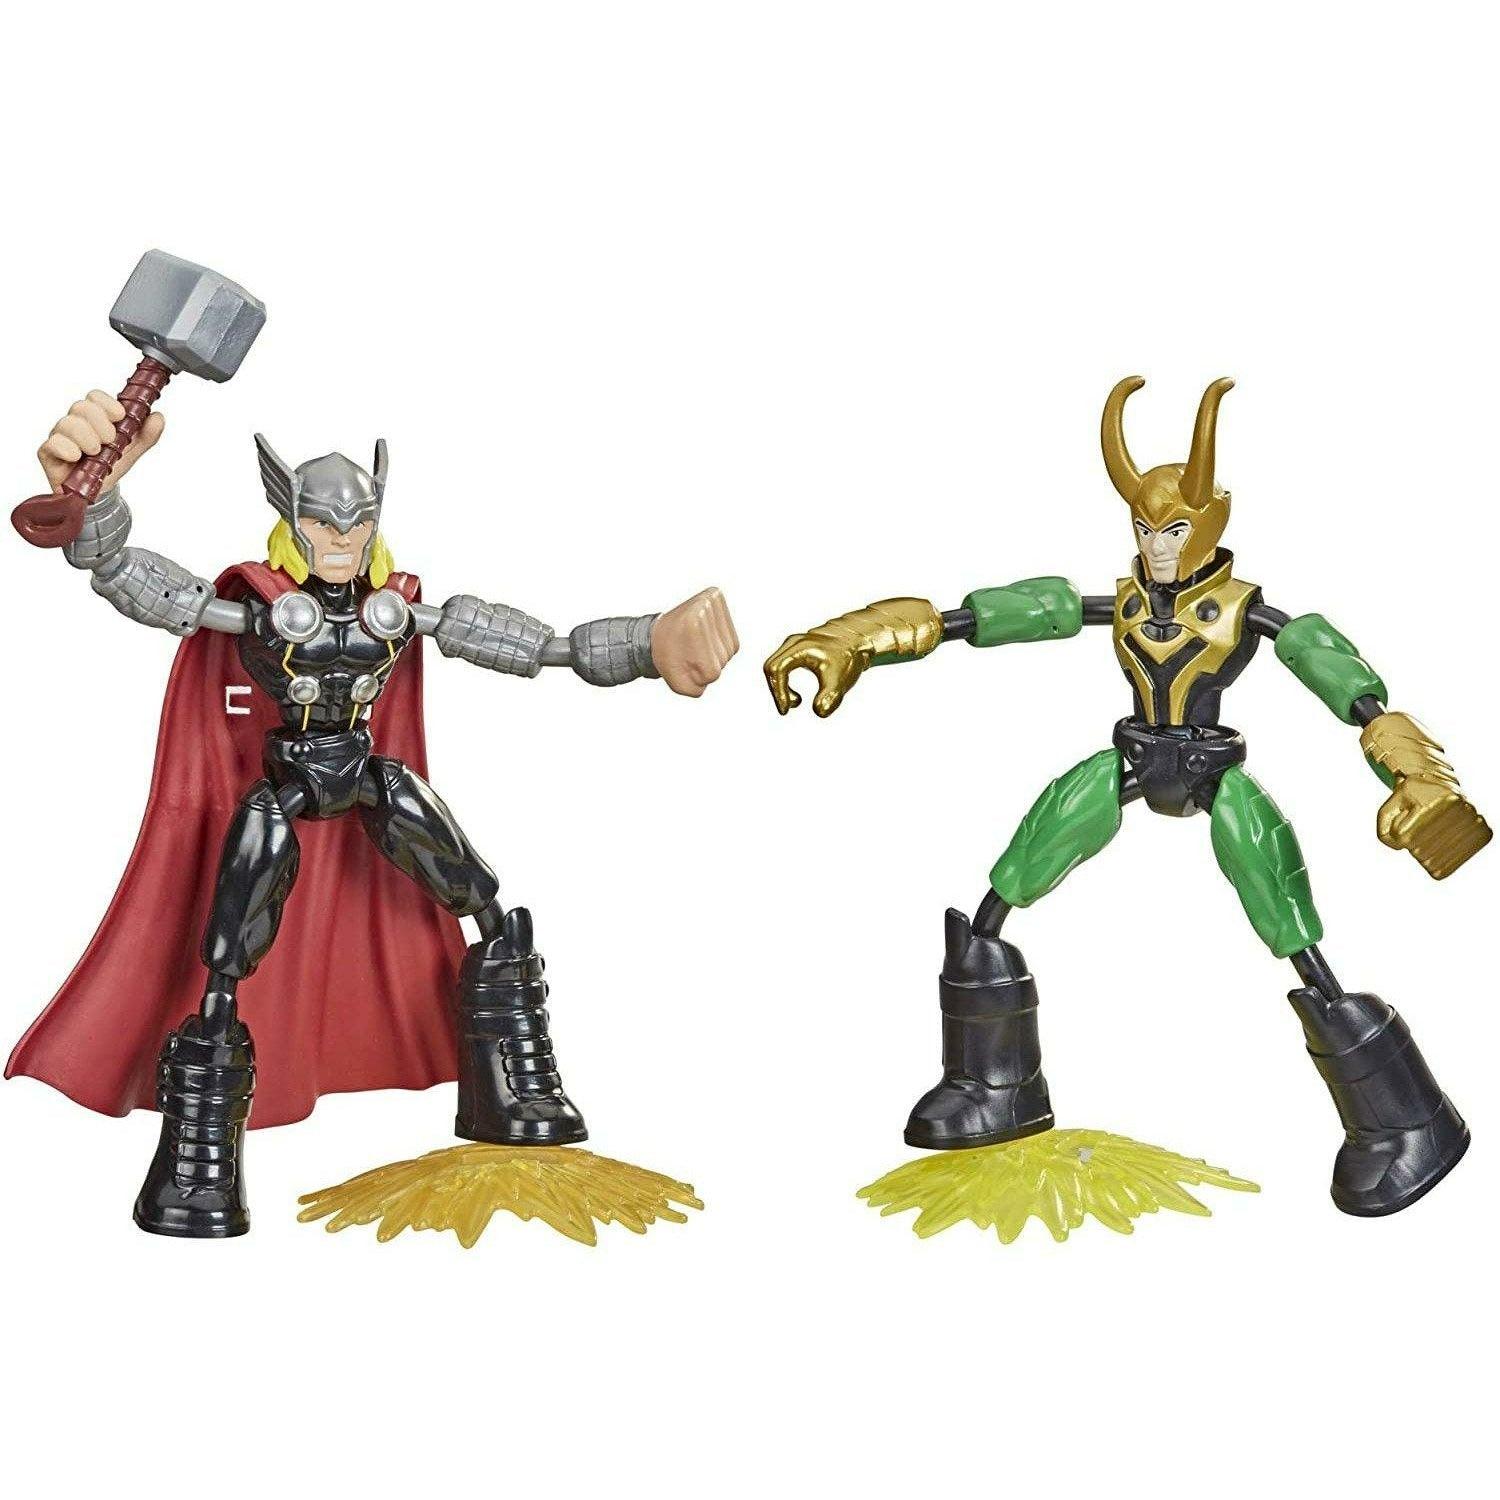 Avengers Marvel Bend and Flex Thor Vs. Loki Action Figure Toys, 6-Inch Flexible Figures, Includes 2 Accessories - BumbleToys - 4+ Years, Boys, Figures, OXE, Pre-Order, Thanos